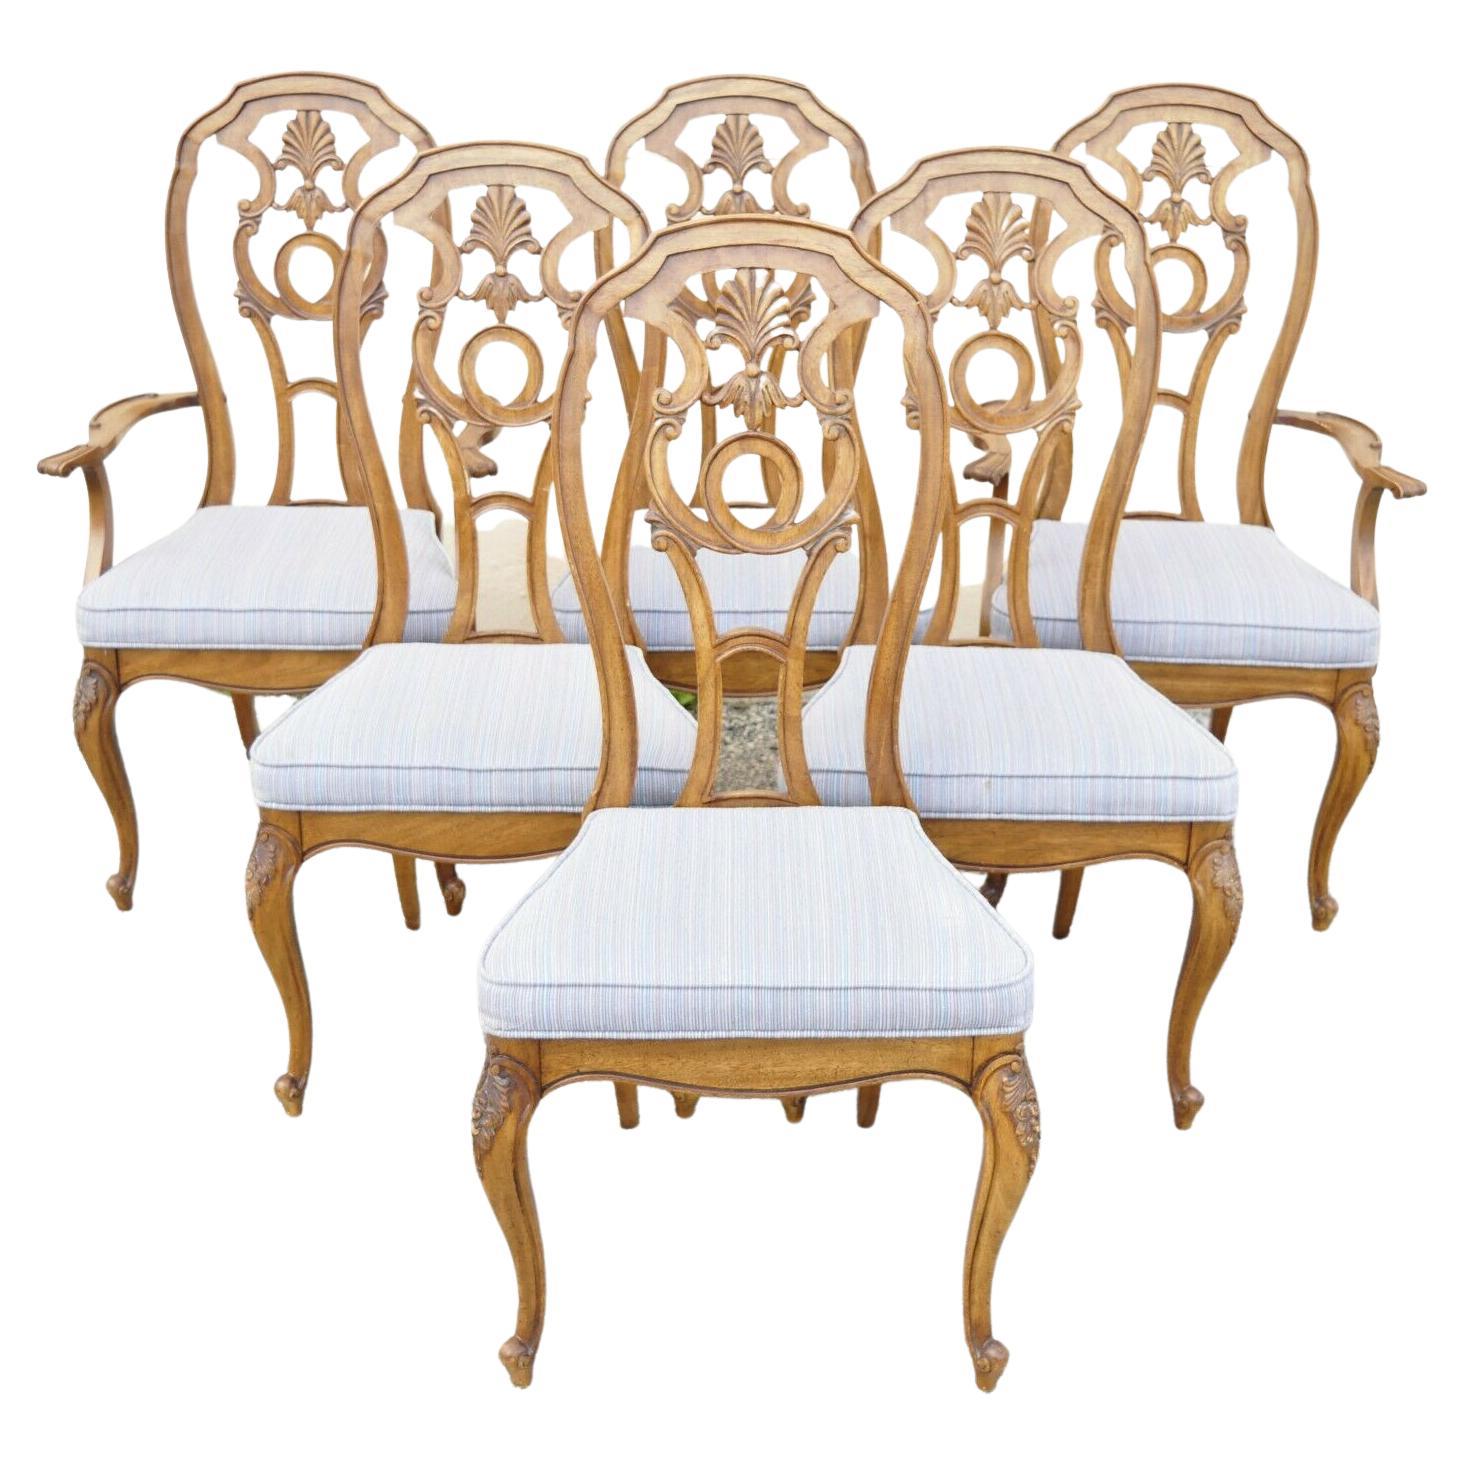 Vintage Italian Baroque Style Carved Wood Dining Chairs, Set of 6